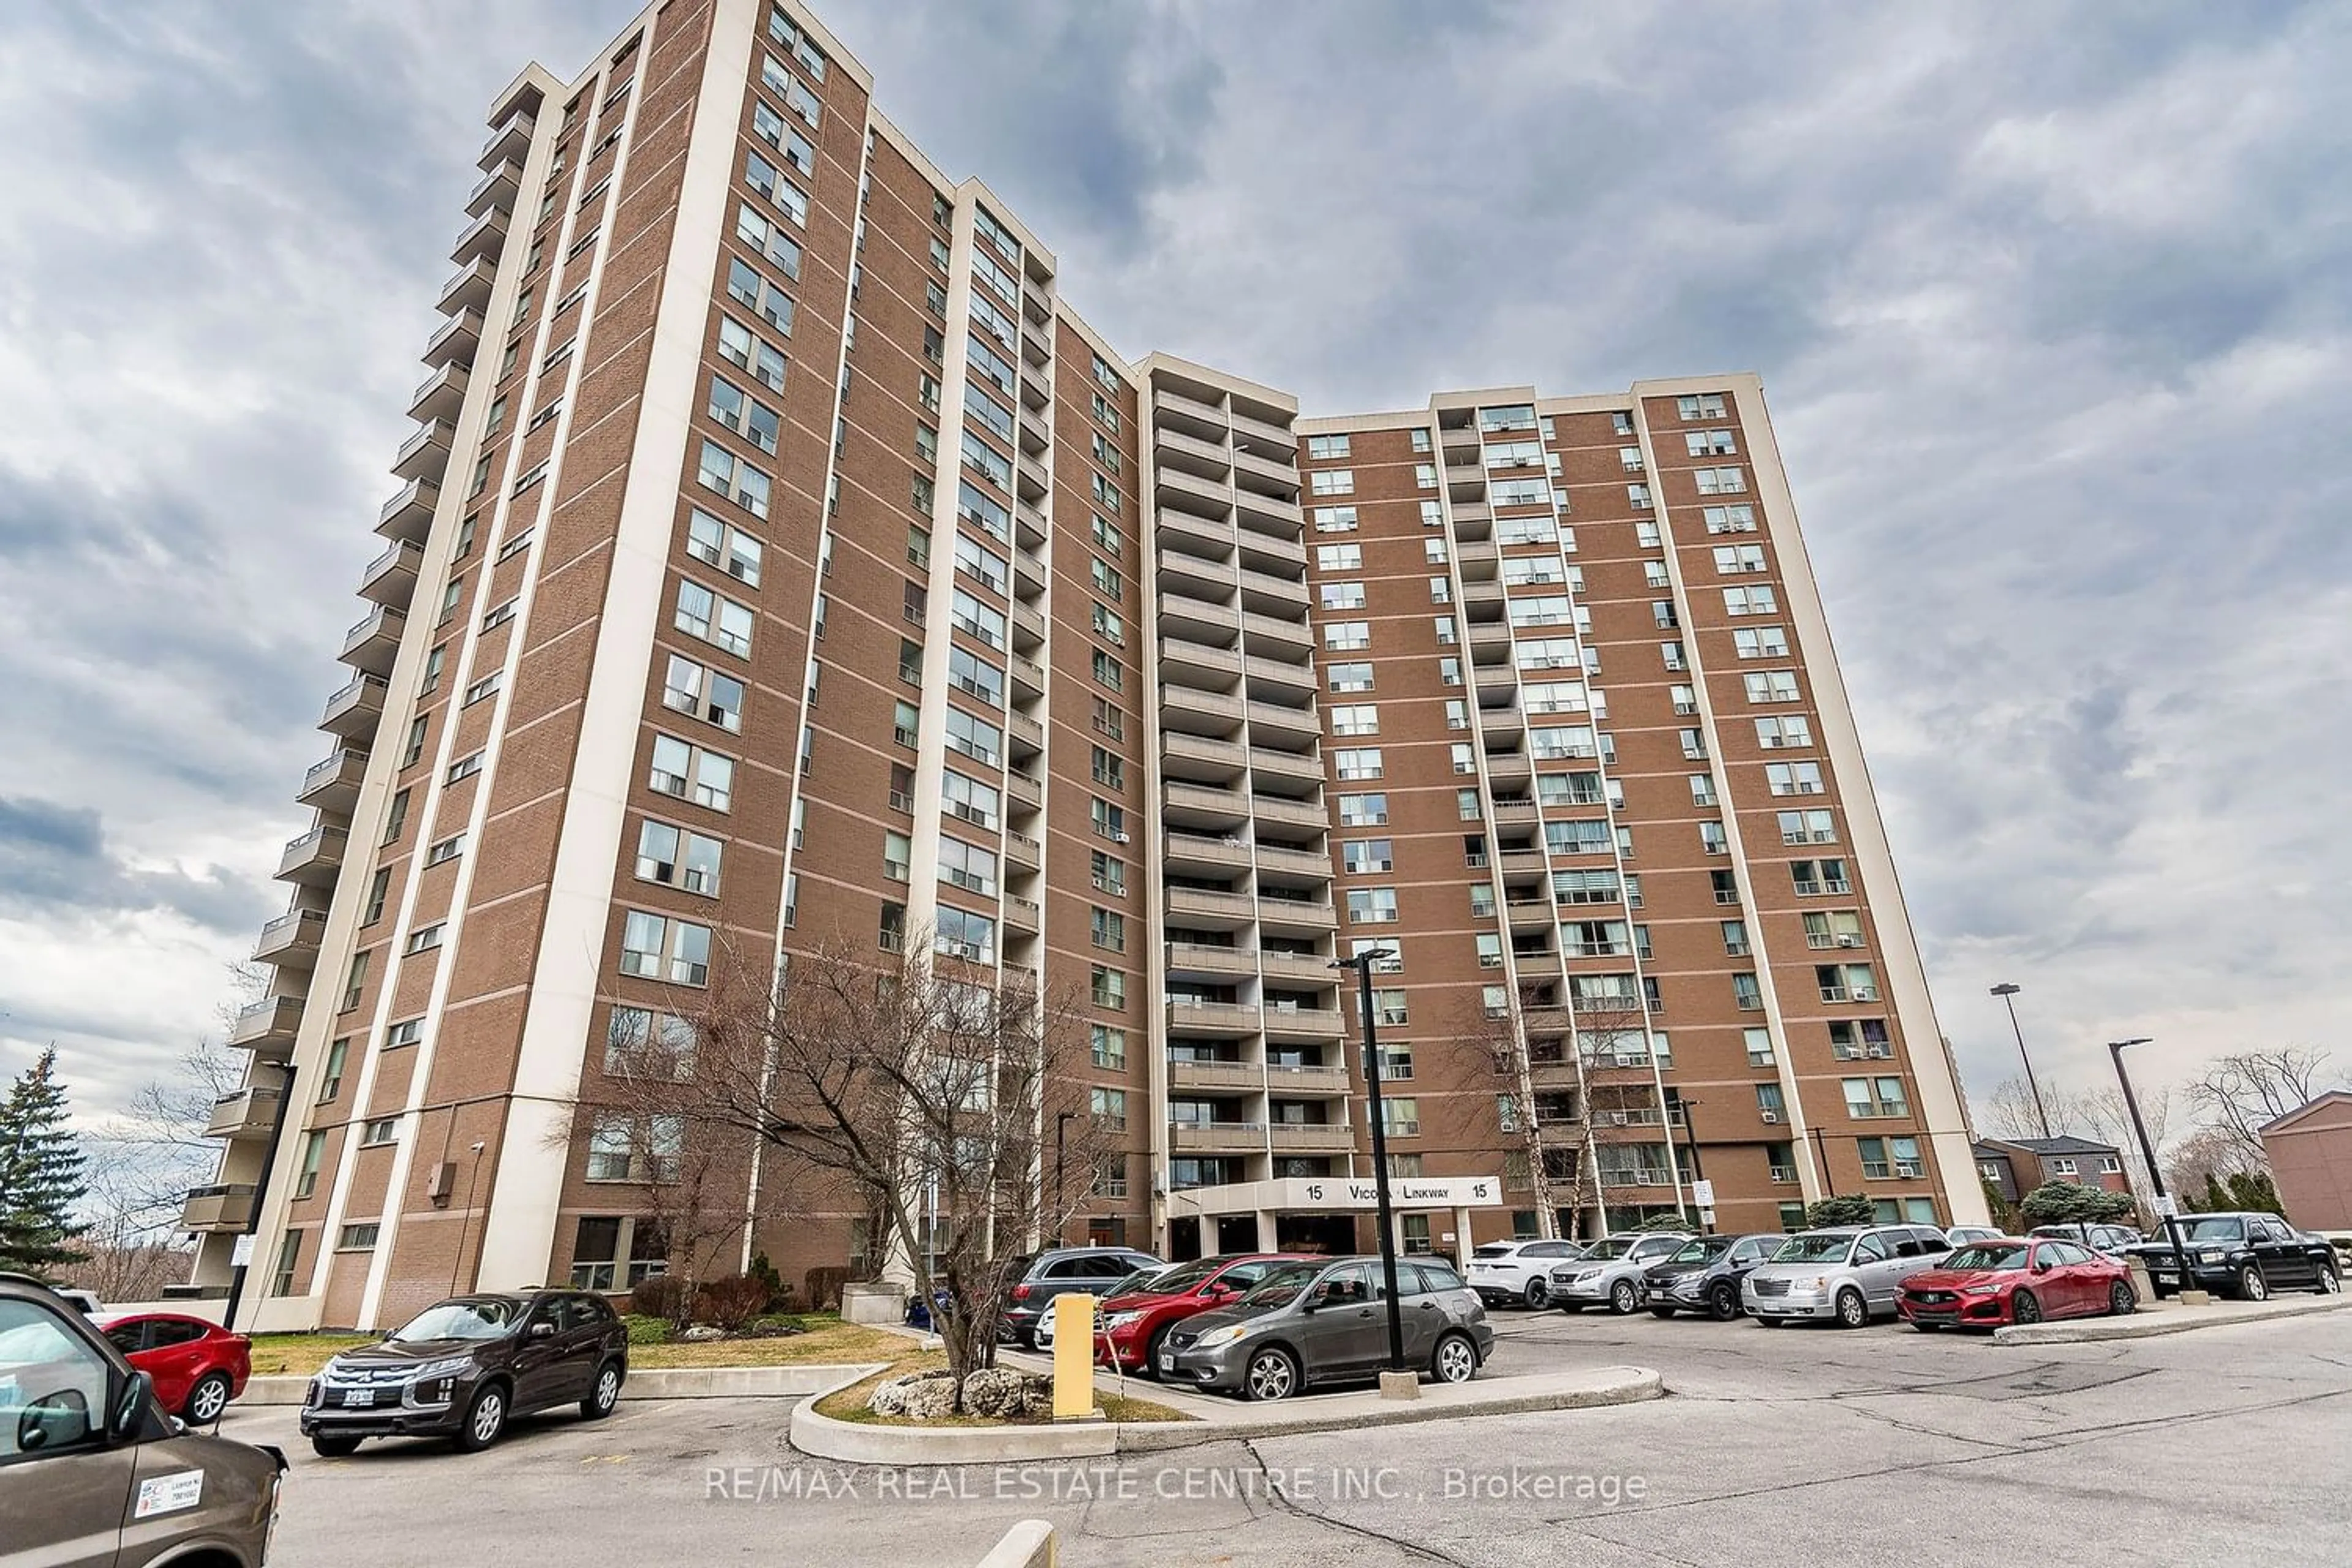 A pic from exterior of the house or condo for 15 Vicora Link Way #108, Toronto Ontario M3C 1A7